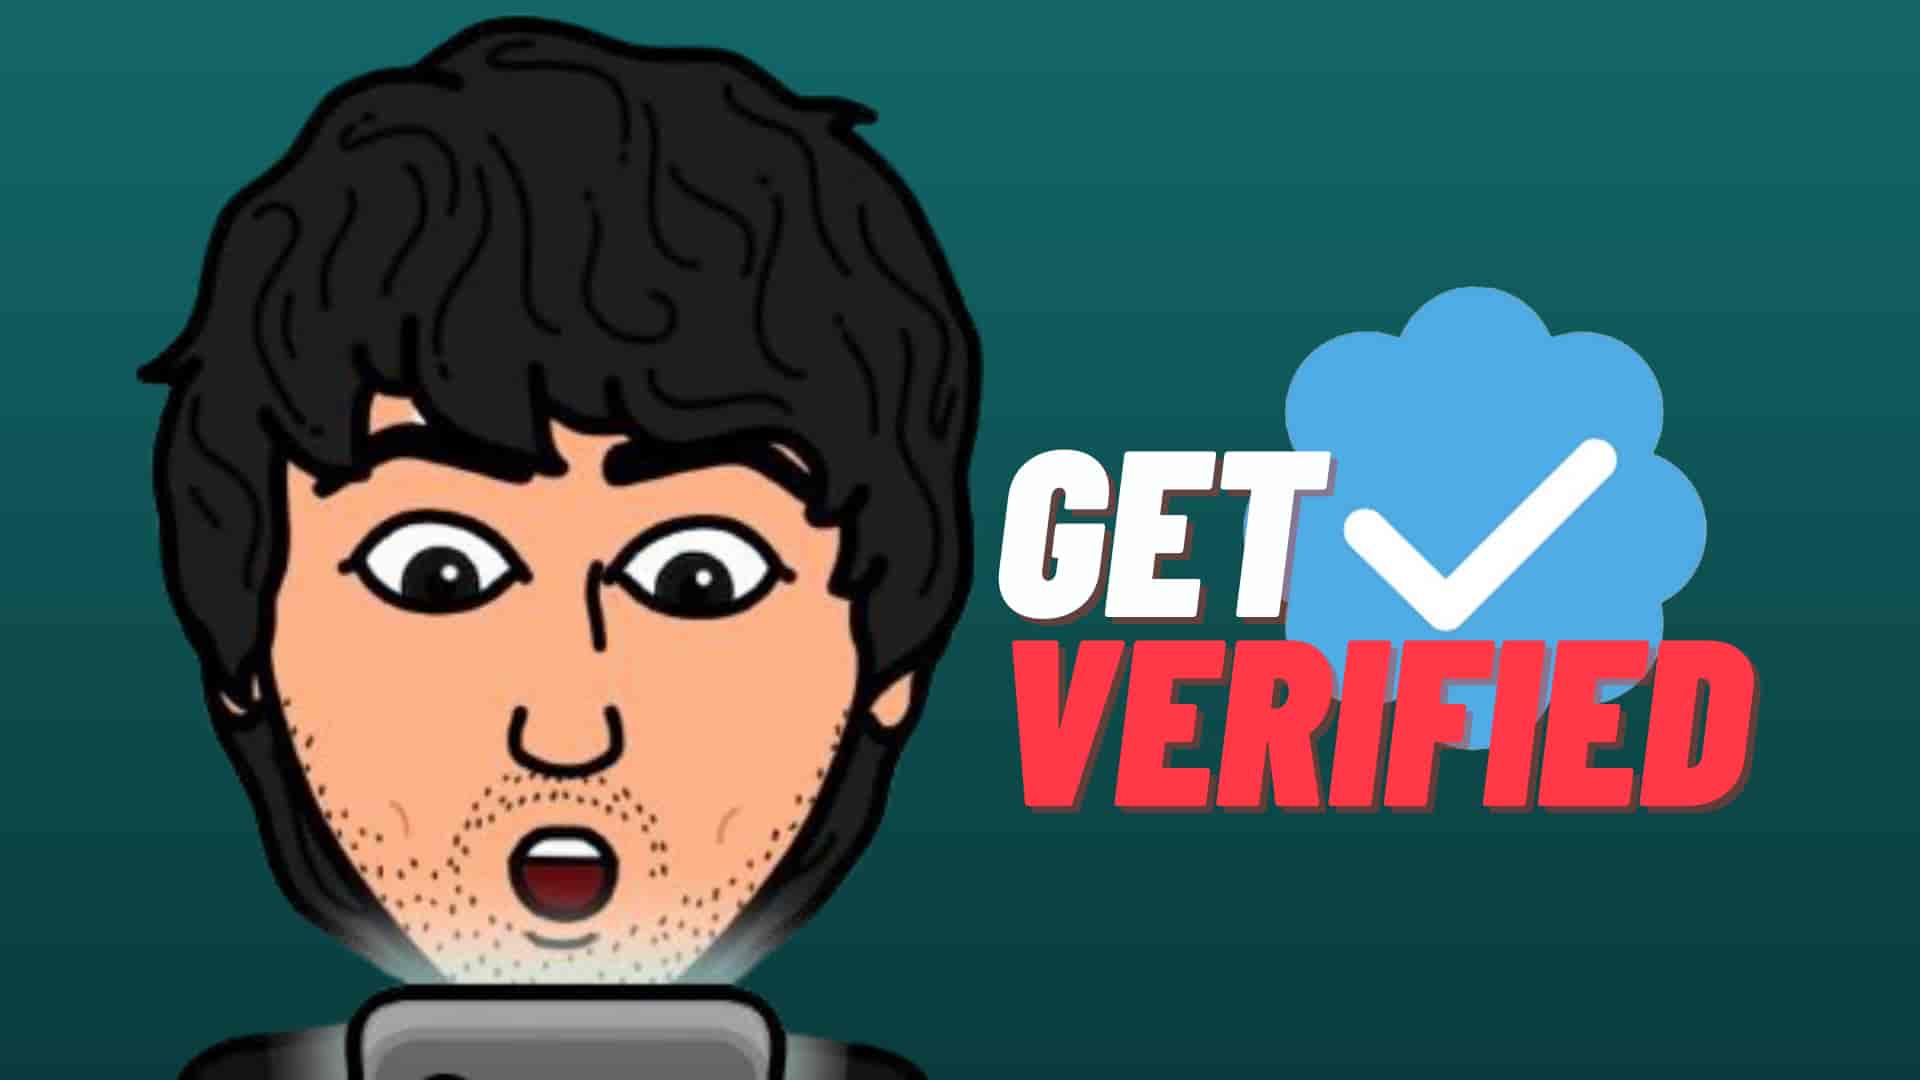 how to get verified on twitter? easy guide for verification